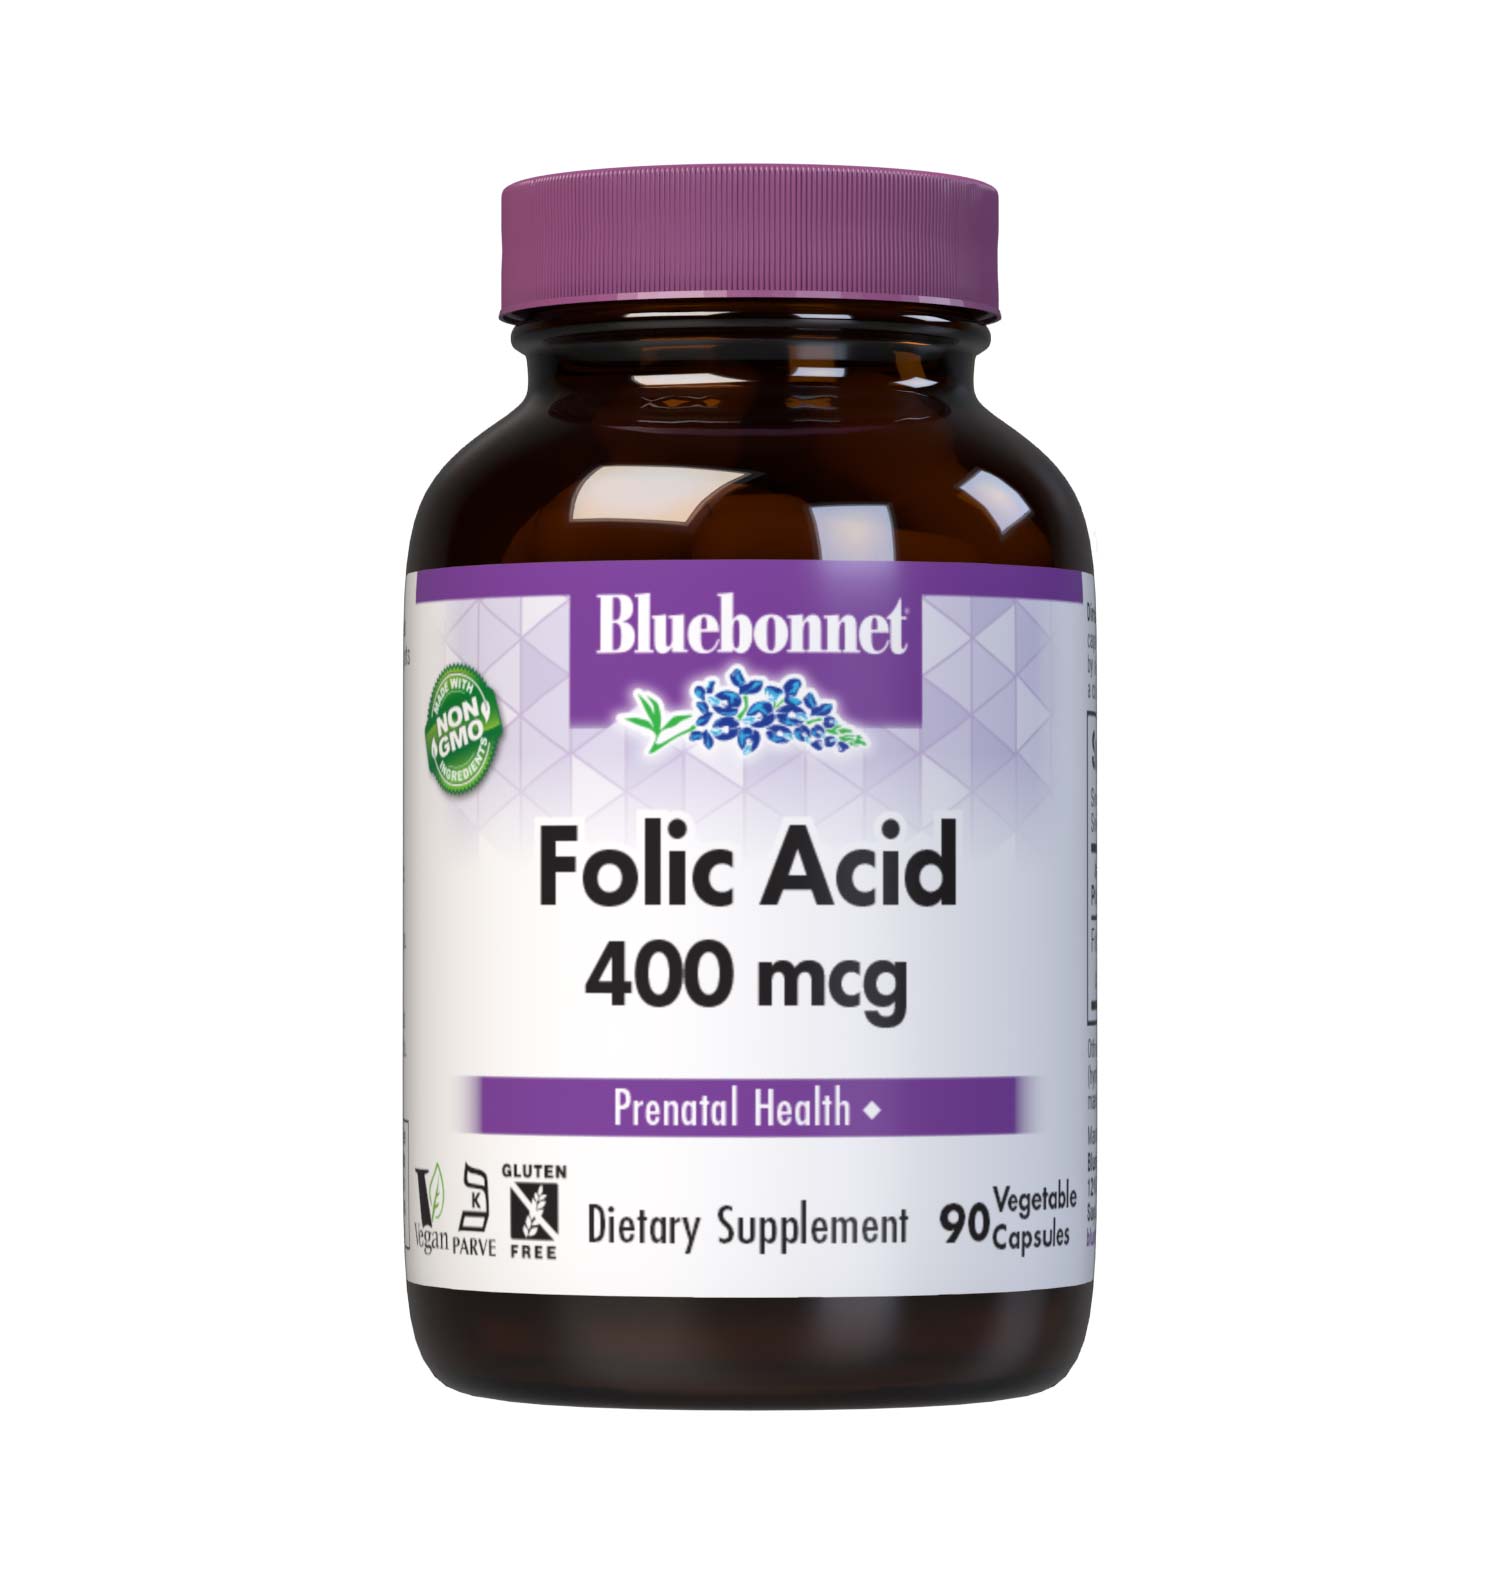 Bluebonnet’s Folic Acid 400 mcg Vegetable Capsules are formulated with folate in its crystalline form which may help support neural tube development. #size_90 count